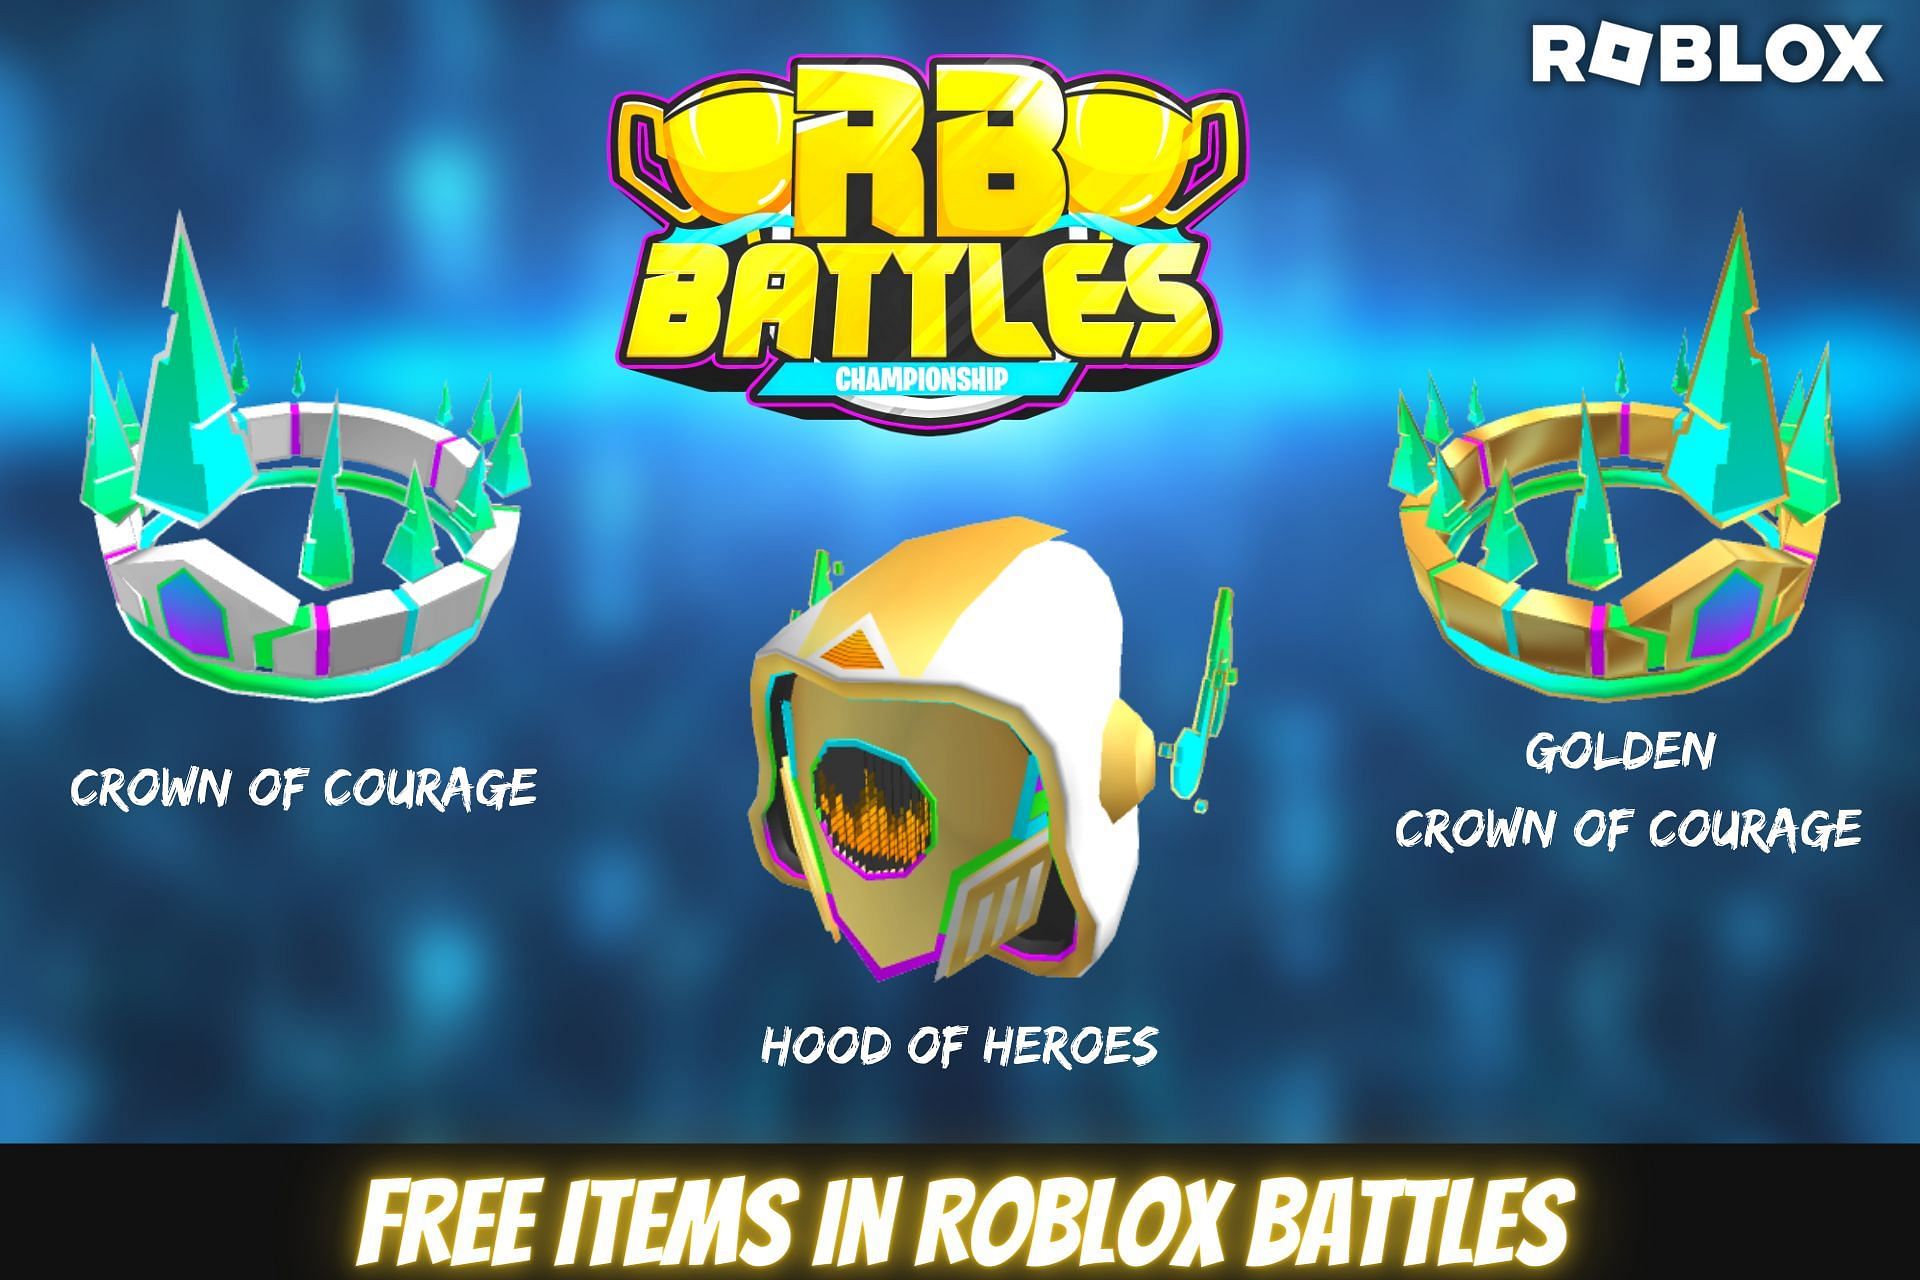 free items in Roblox battles